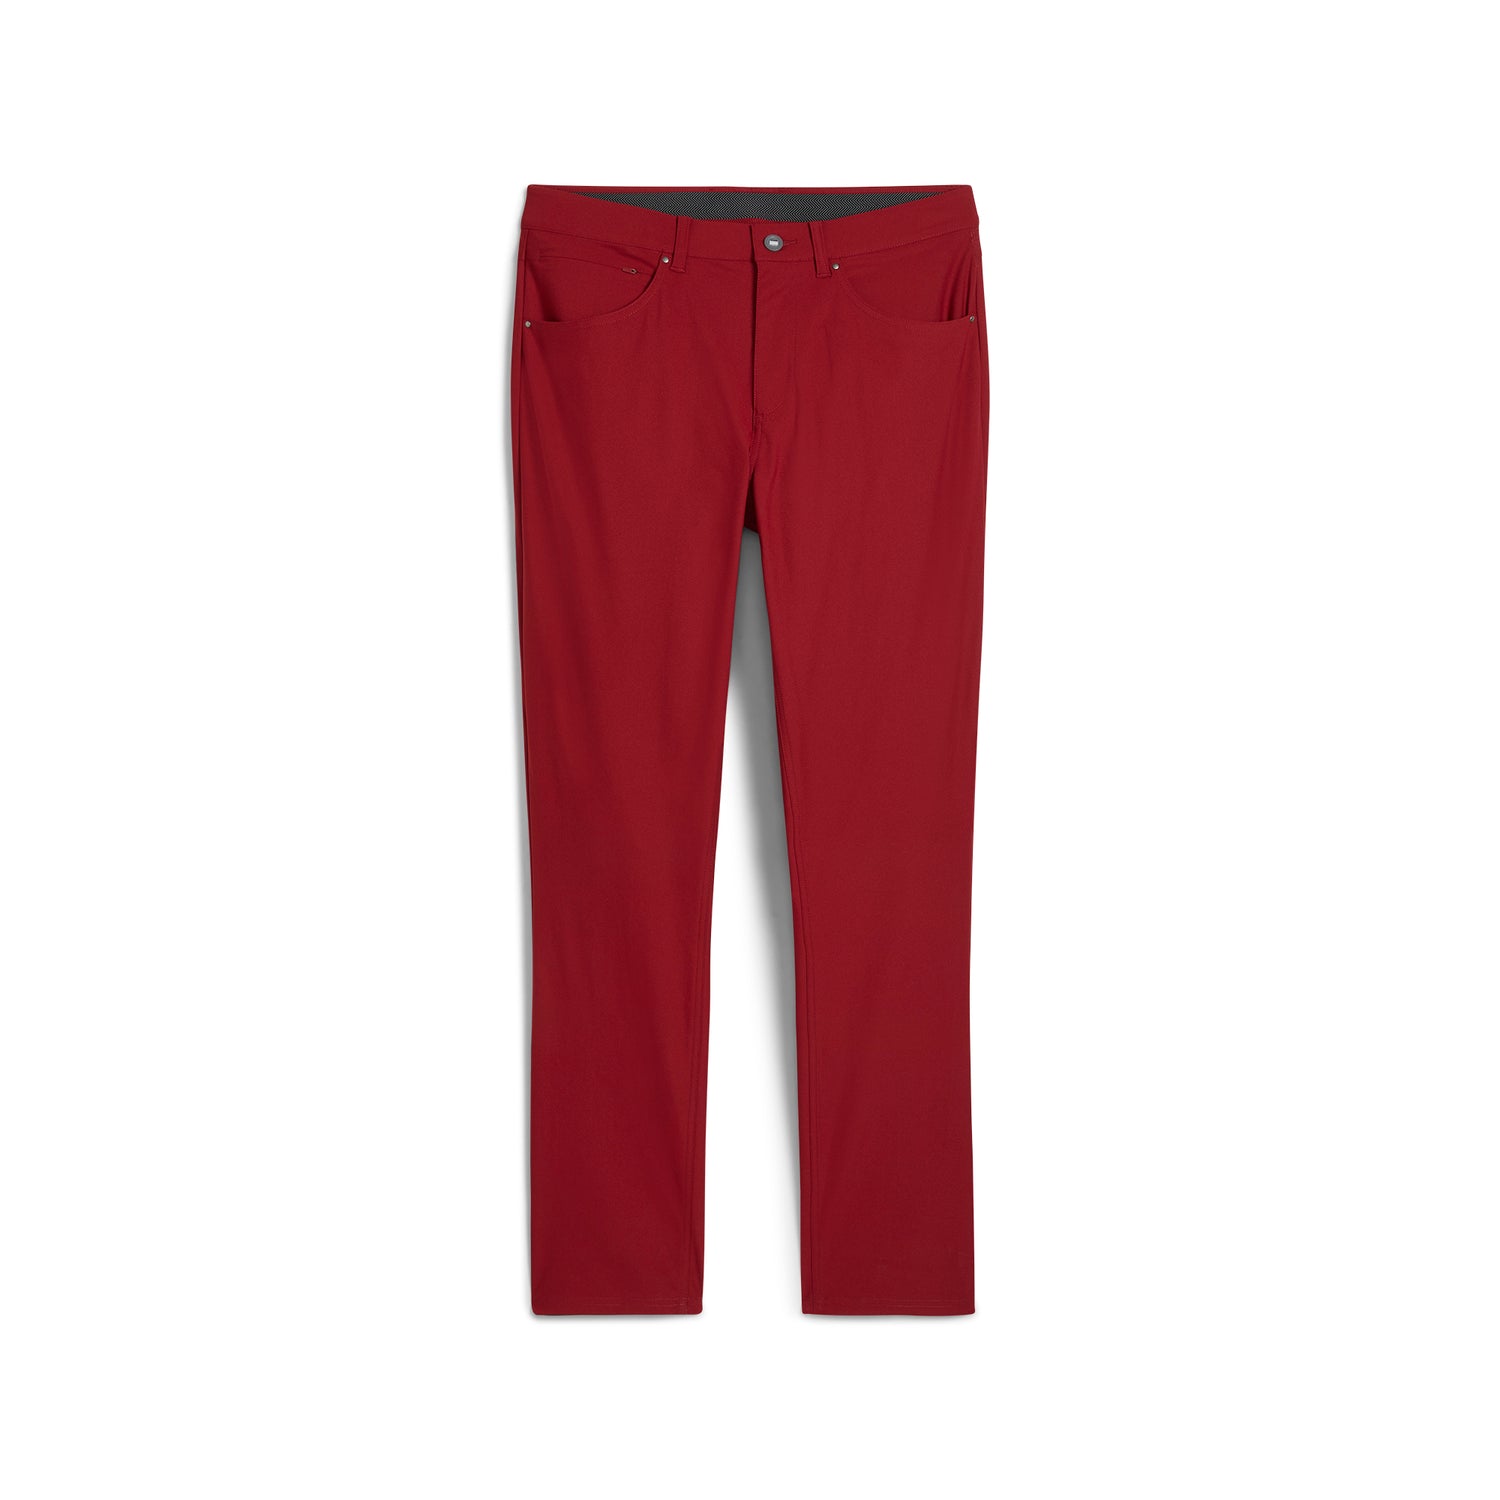 Mens Black Stewart & Red Pant Outfit